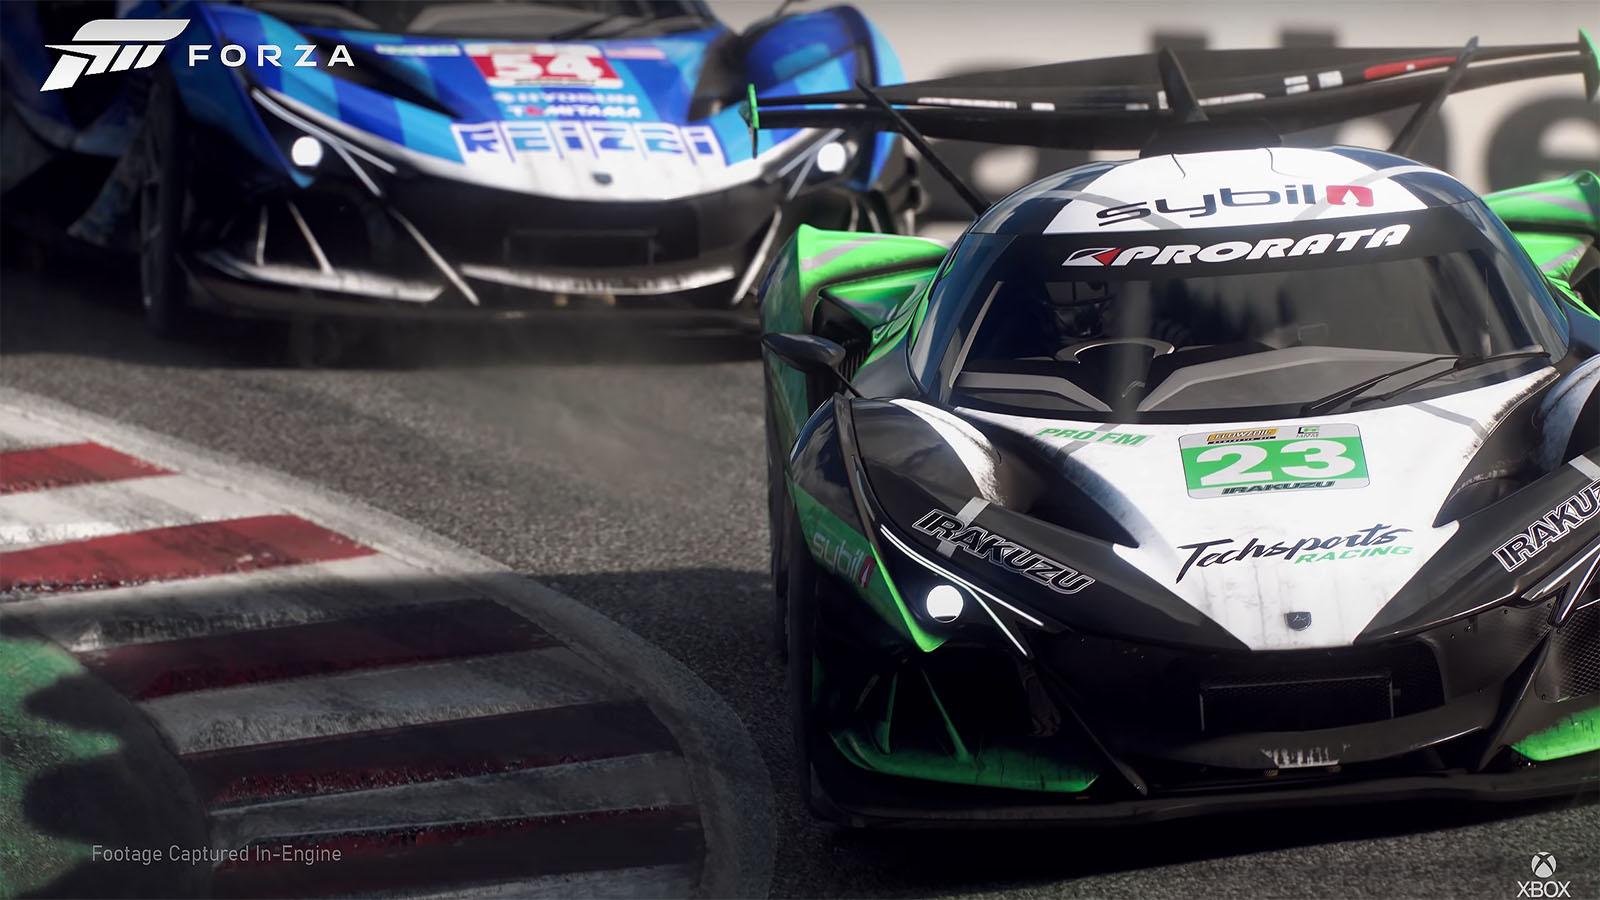 Forza Motorsport: Release date, platforms, gameplay & what we know so far